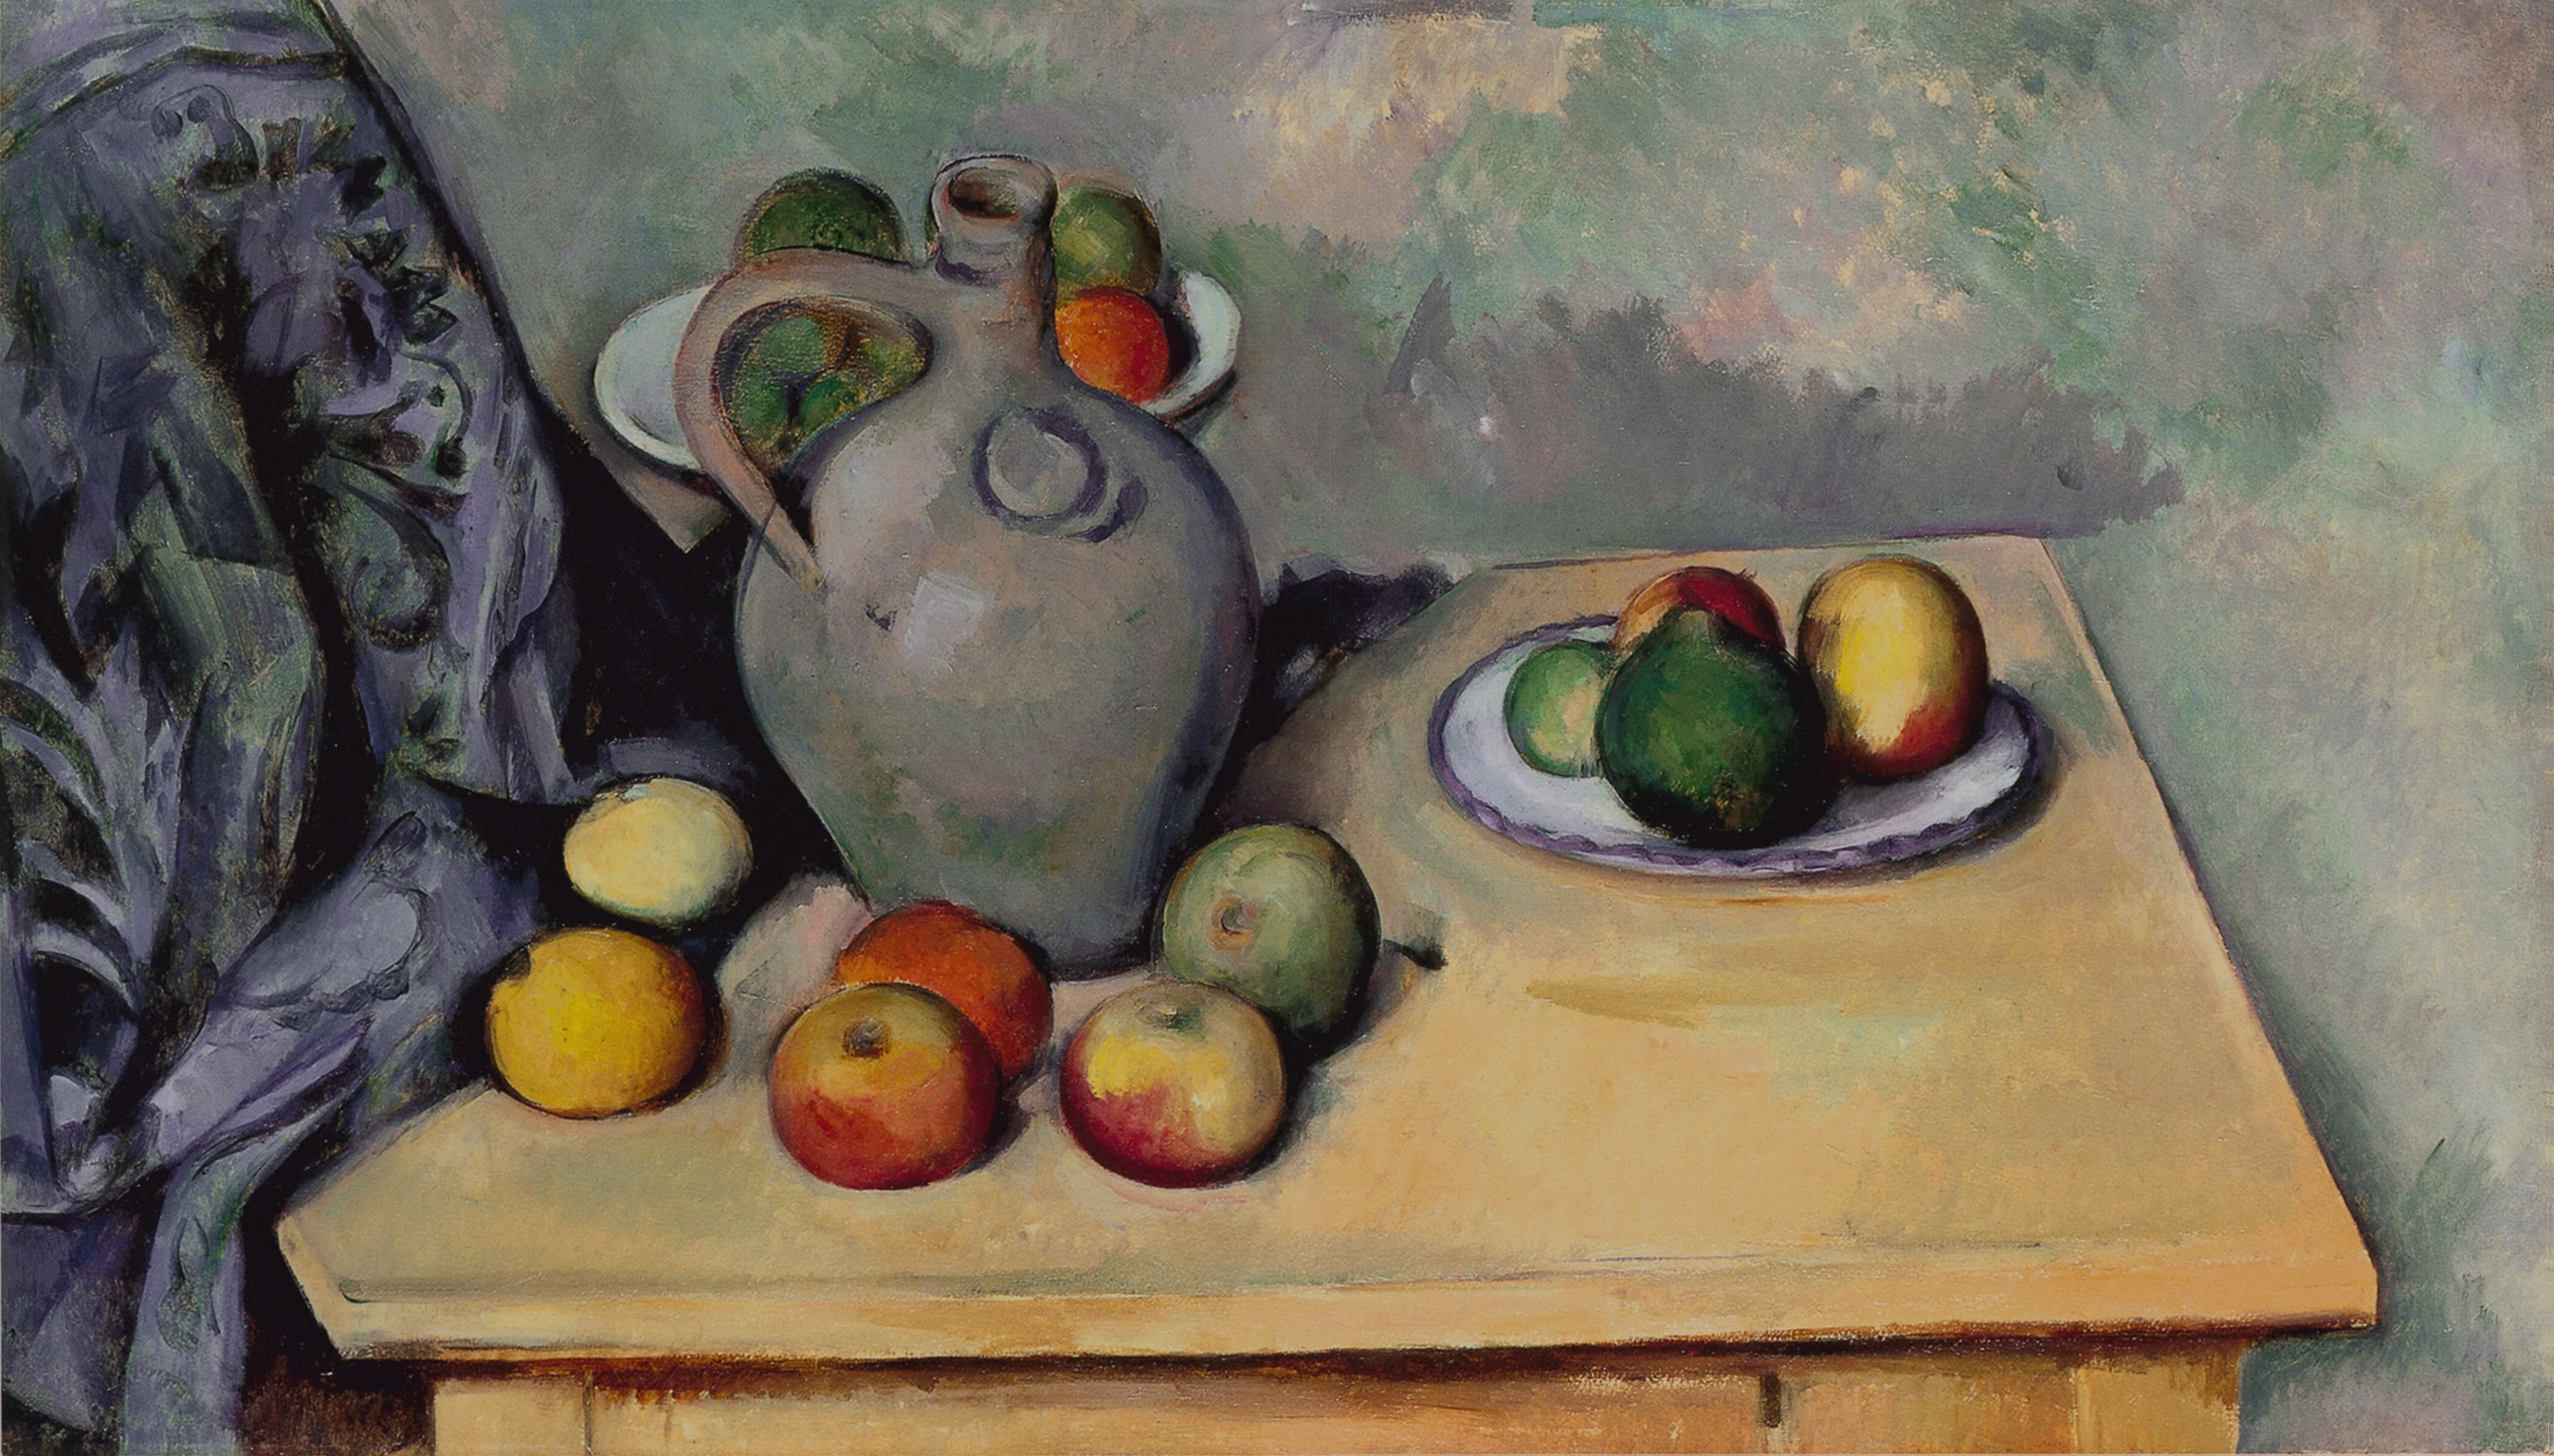 Pitcher and Fruits on a Table, Paul Cézanne